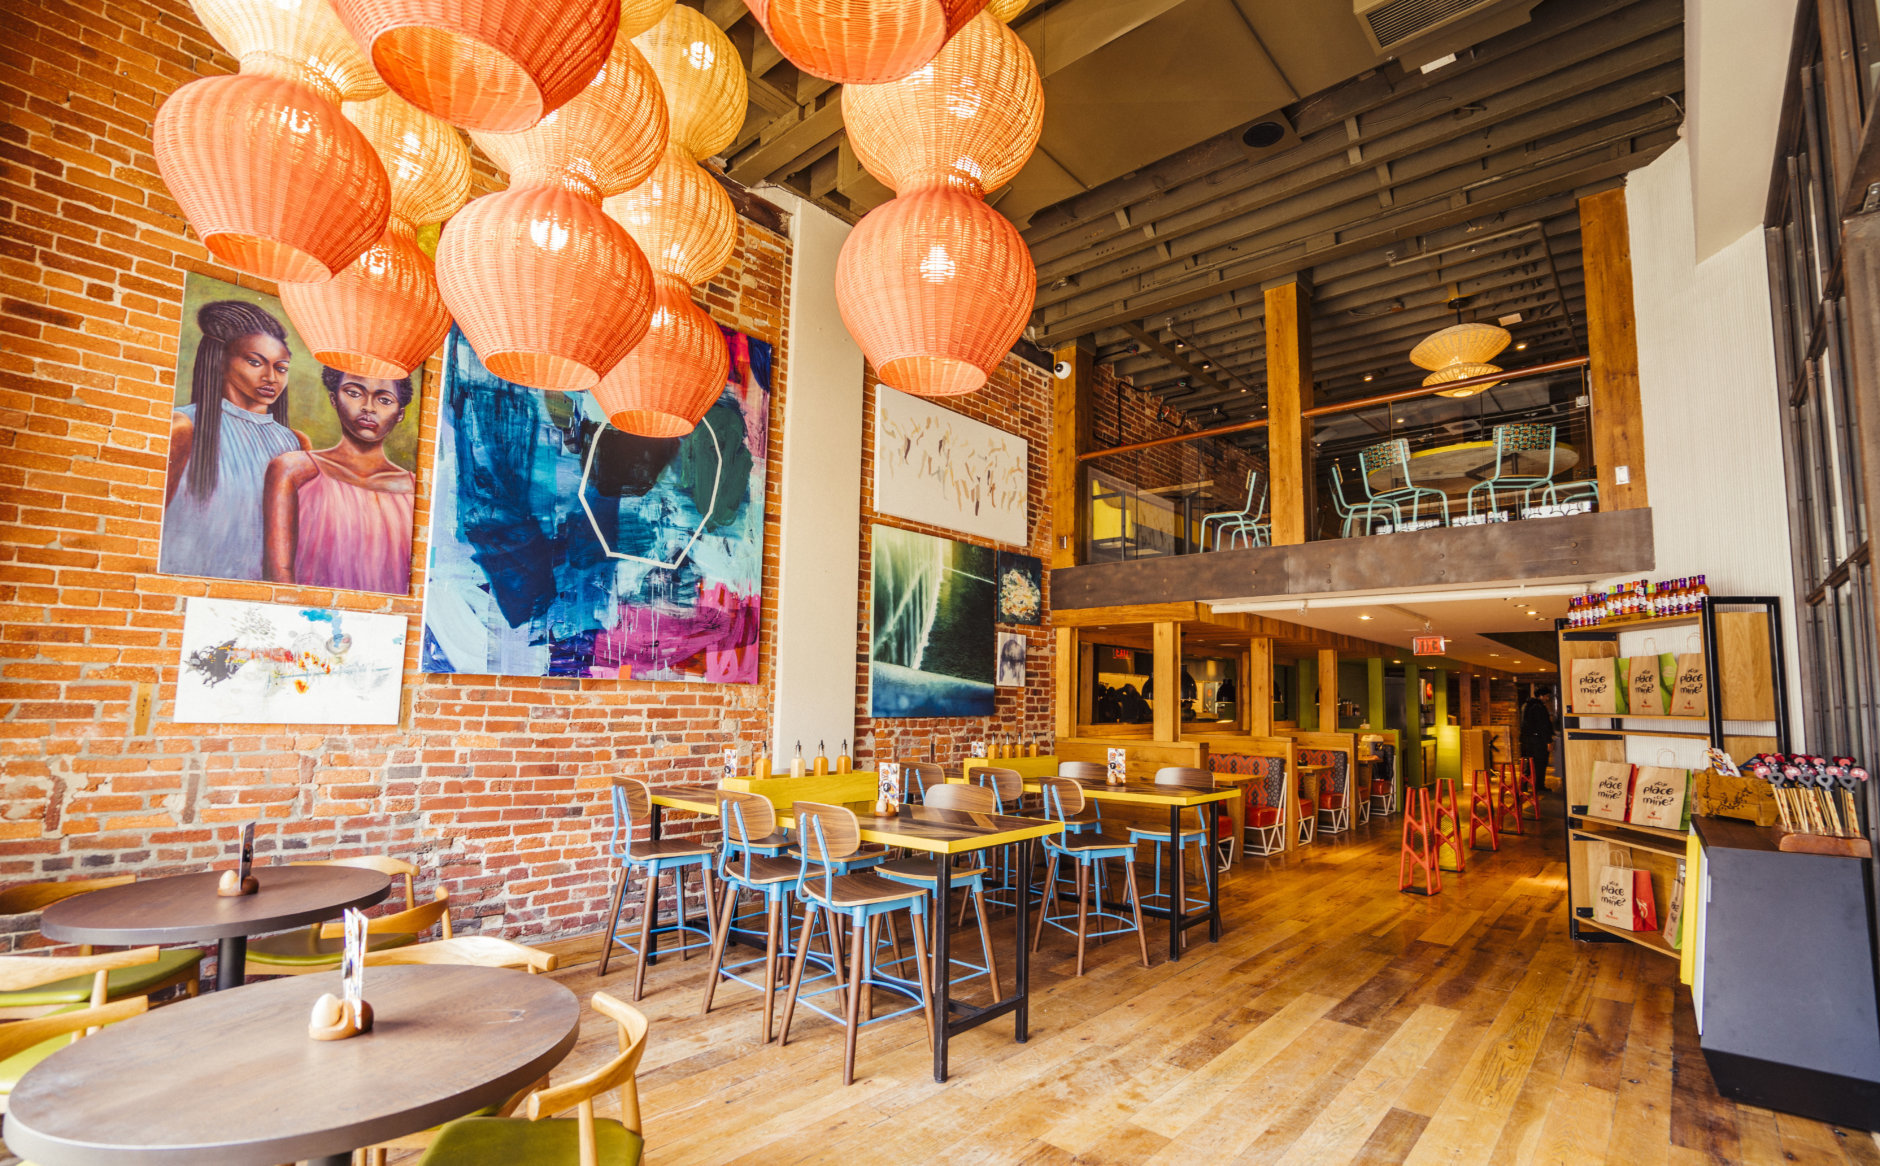 South African artists have also created handmade furniture for the Dupont location, including pendant lights made from recycled clothing. (Courtesy Nando's Peri-Peri)